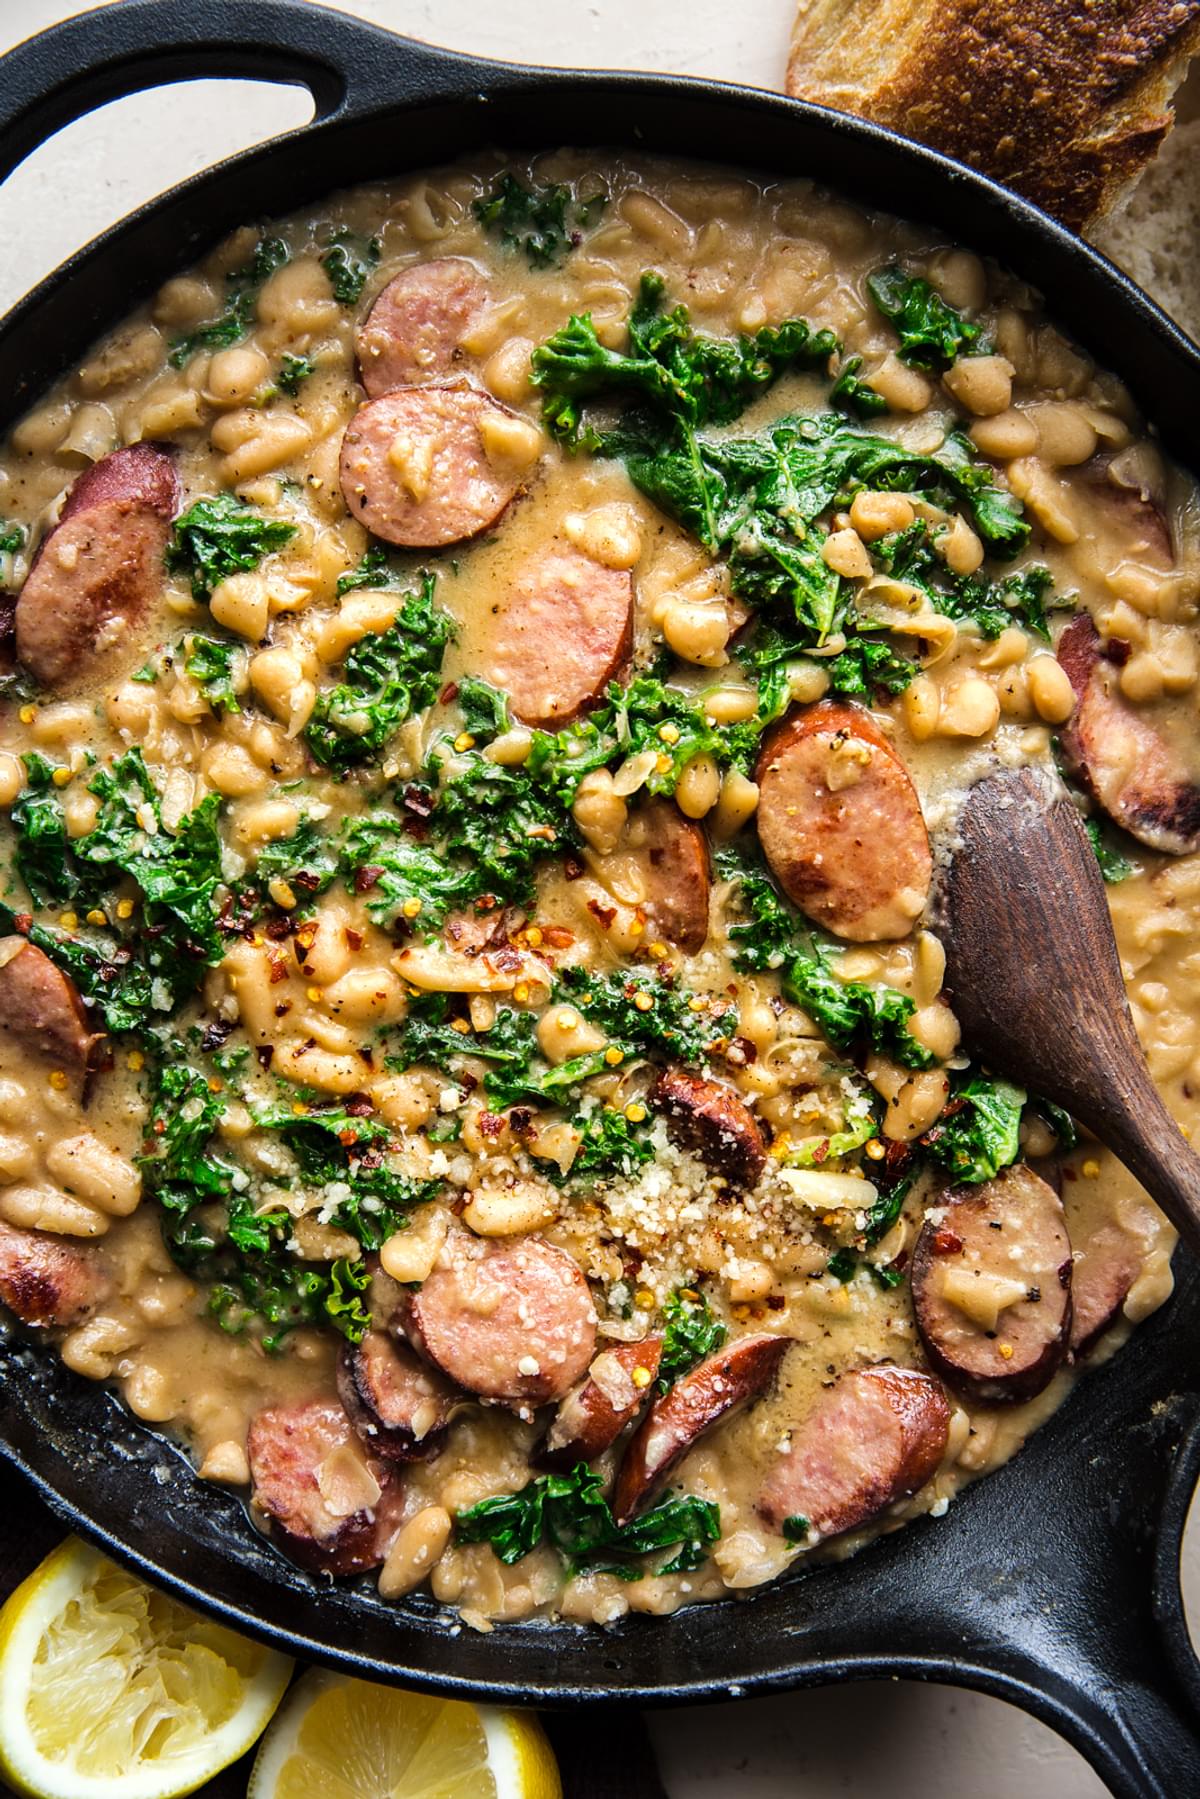 white bean and sausage skillet dinner with kale, parmesan cheese and lemon being stirred with a spoon